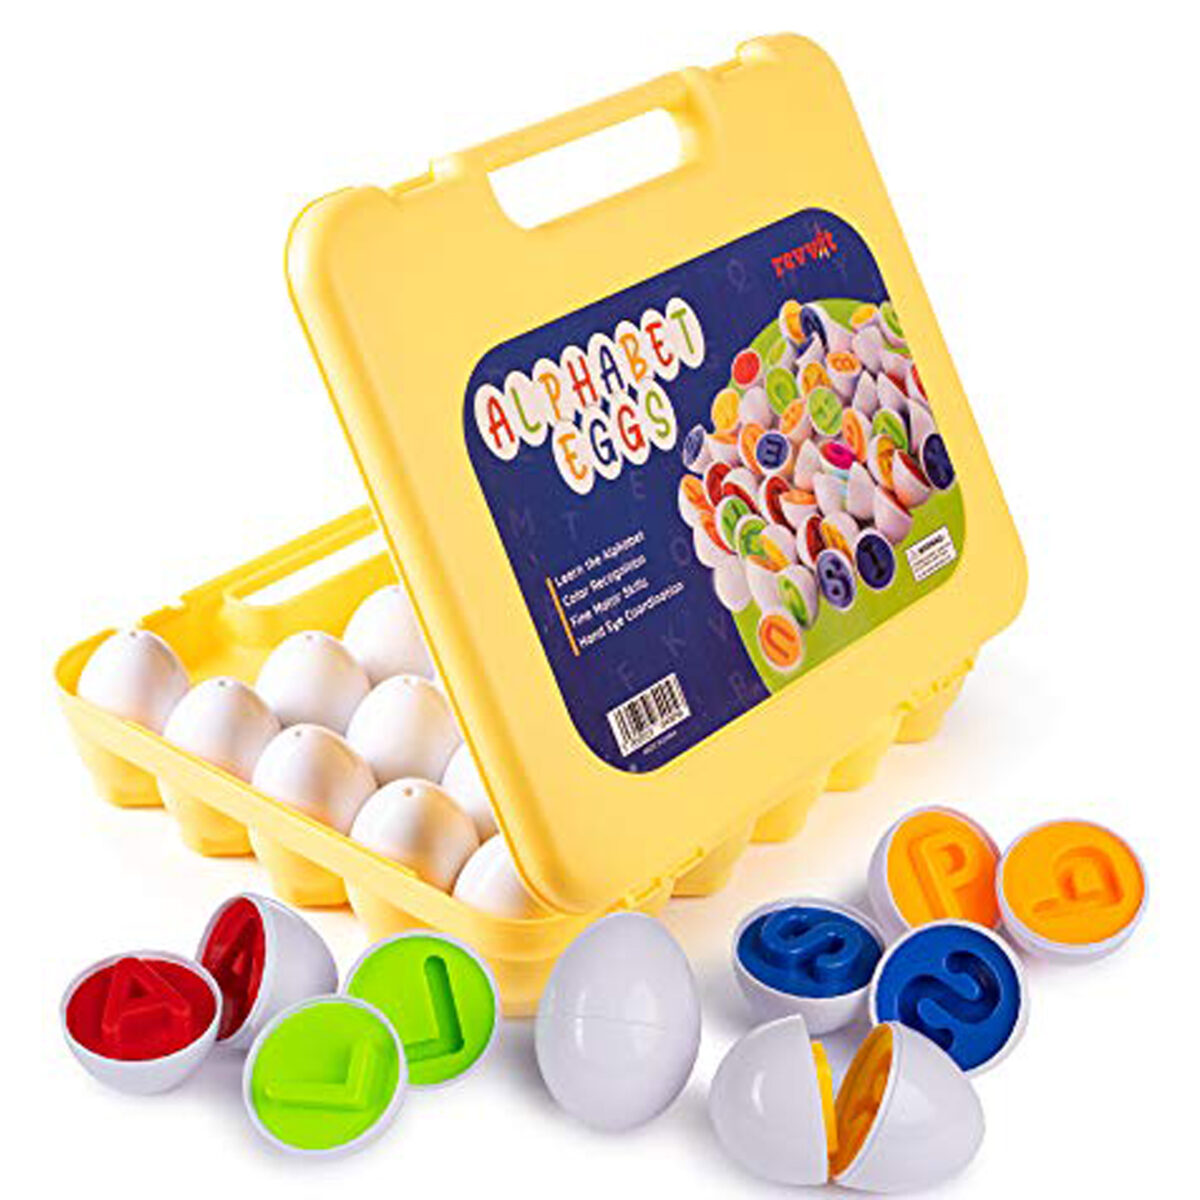 Matching Eggs (Revvit) is a matching game to help children learn the alphabet in uppercase letters.